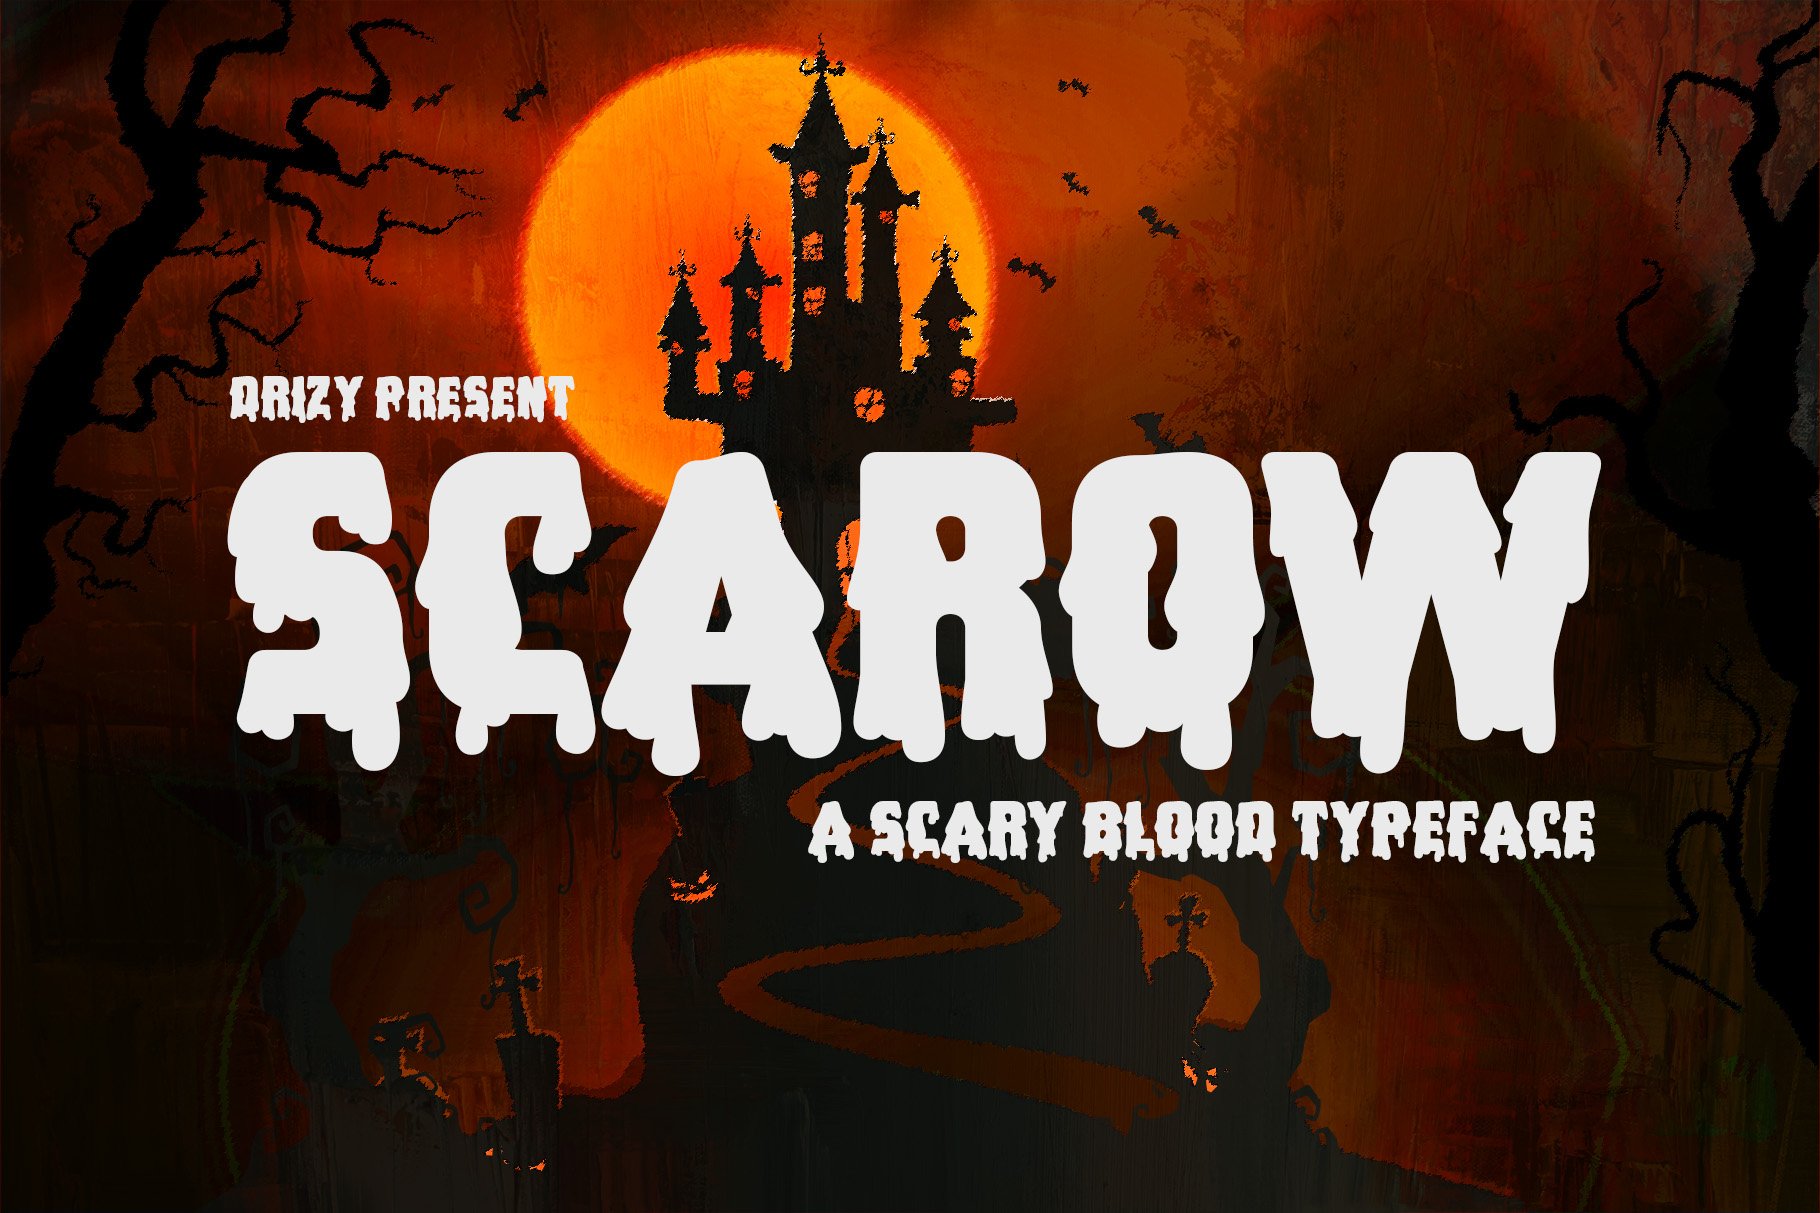 Scarow - Blood Dripping Font cover image.